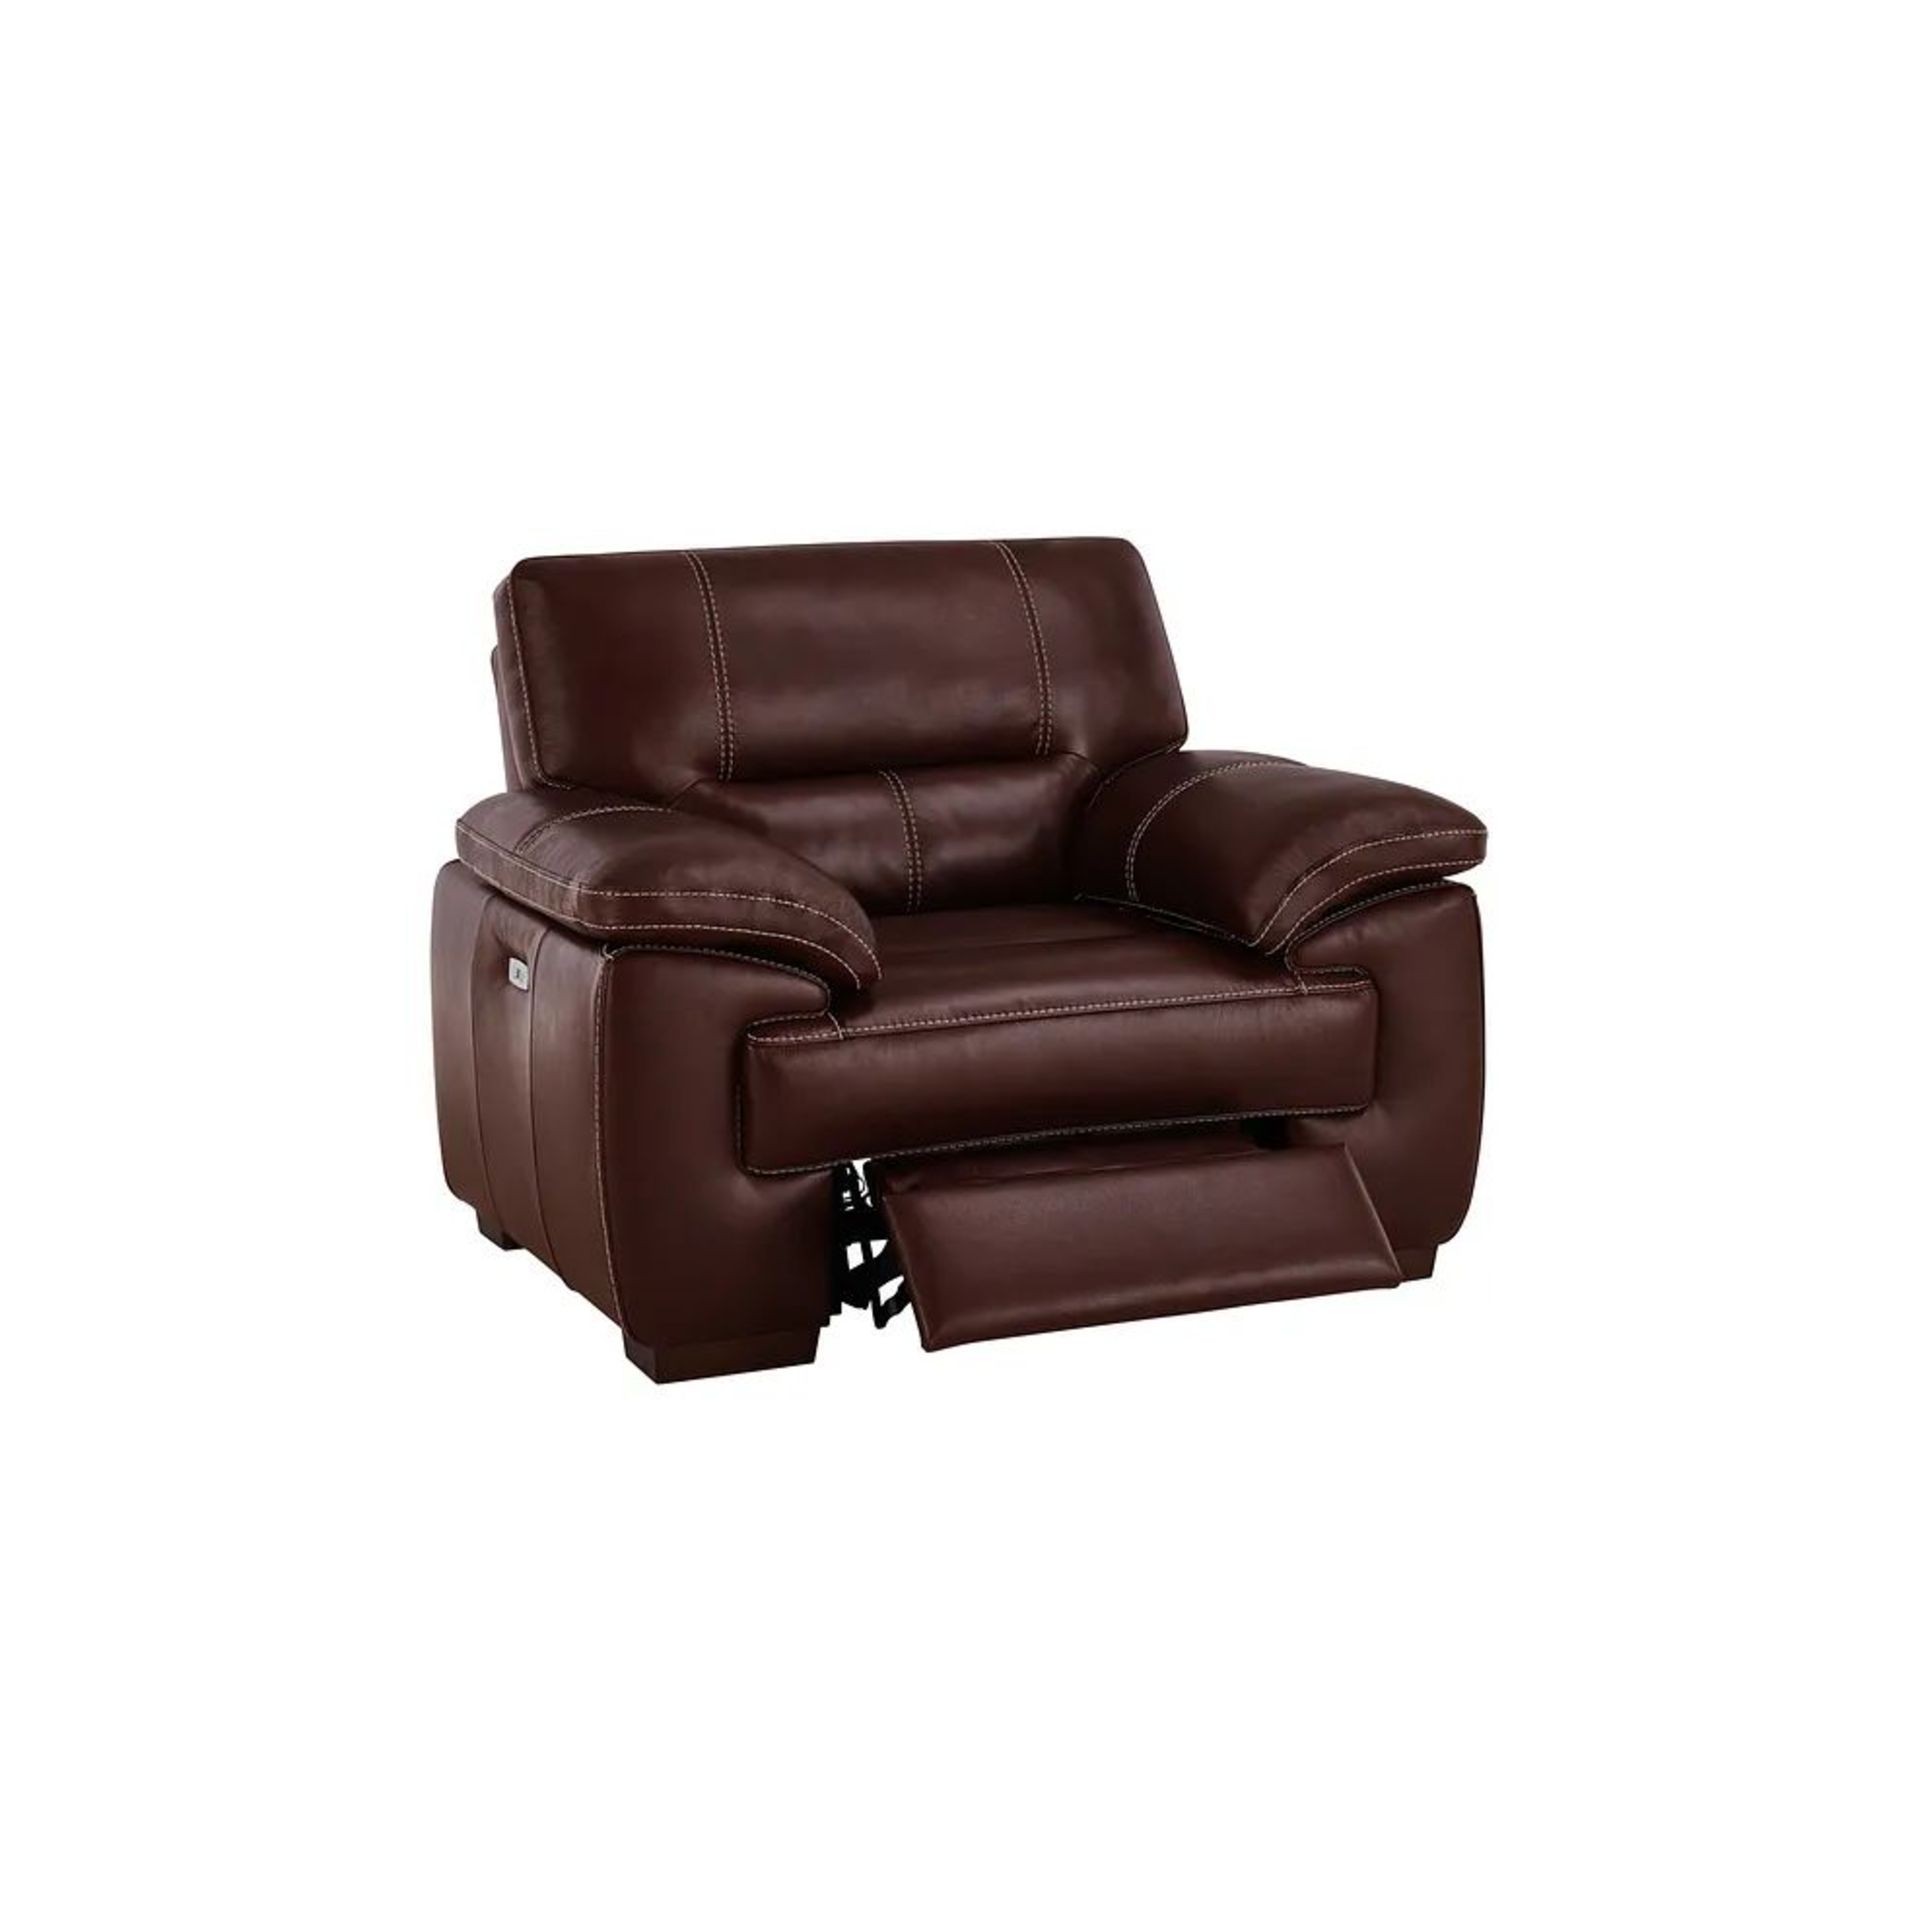 BRAND NEW ARLINGTON Electric Recliner Armchair - TAN LEATHER. RRP £1199. Create a traditional and - Image 3 of 12